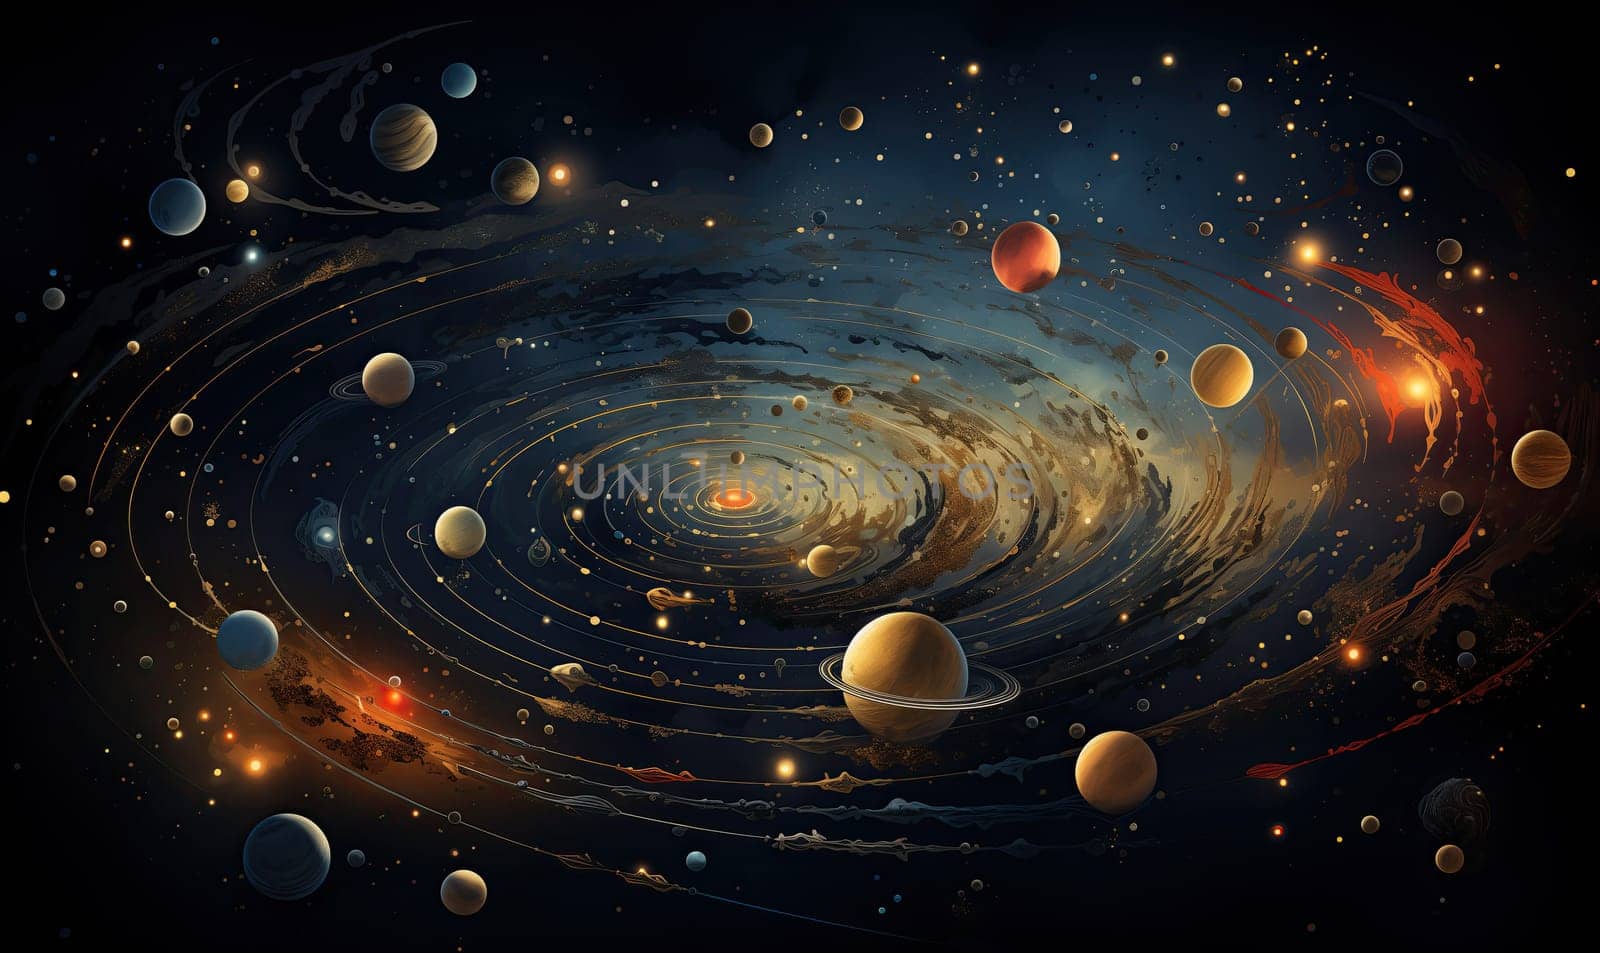 Abstract image of planets on a dark background. by Fischeron